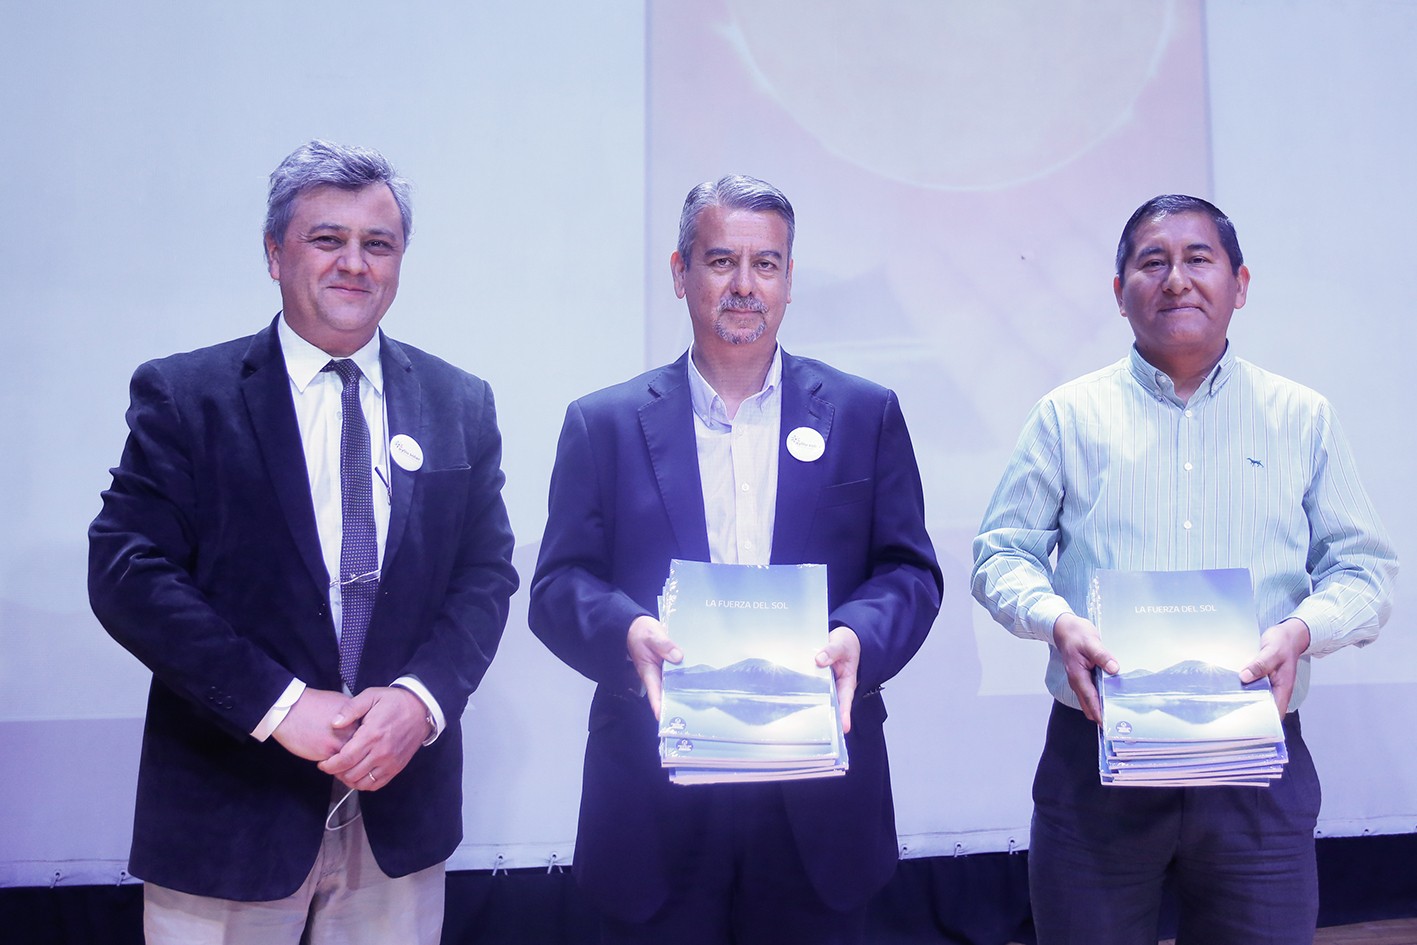 Ayllu Solar, Initiative From SERC Chile, Launches In Arica, Chile, The Book Called “La Fuerza Del Sol” (The Strength Of The Sun)